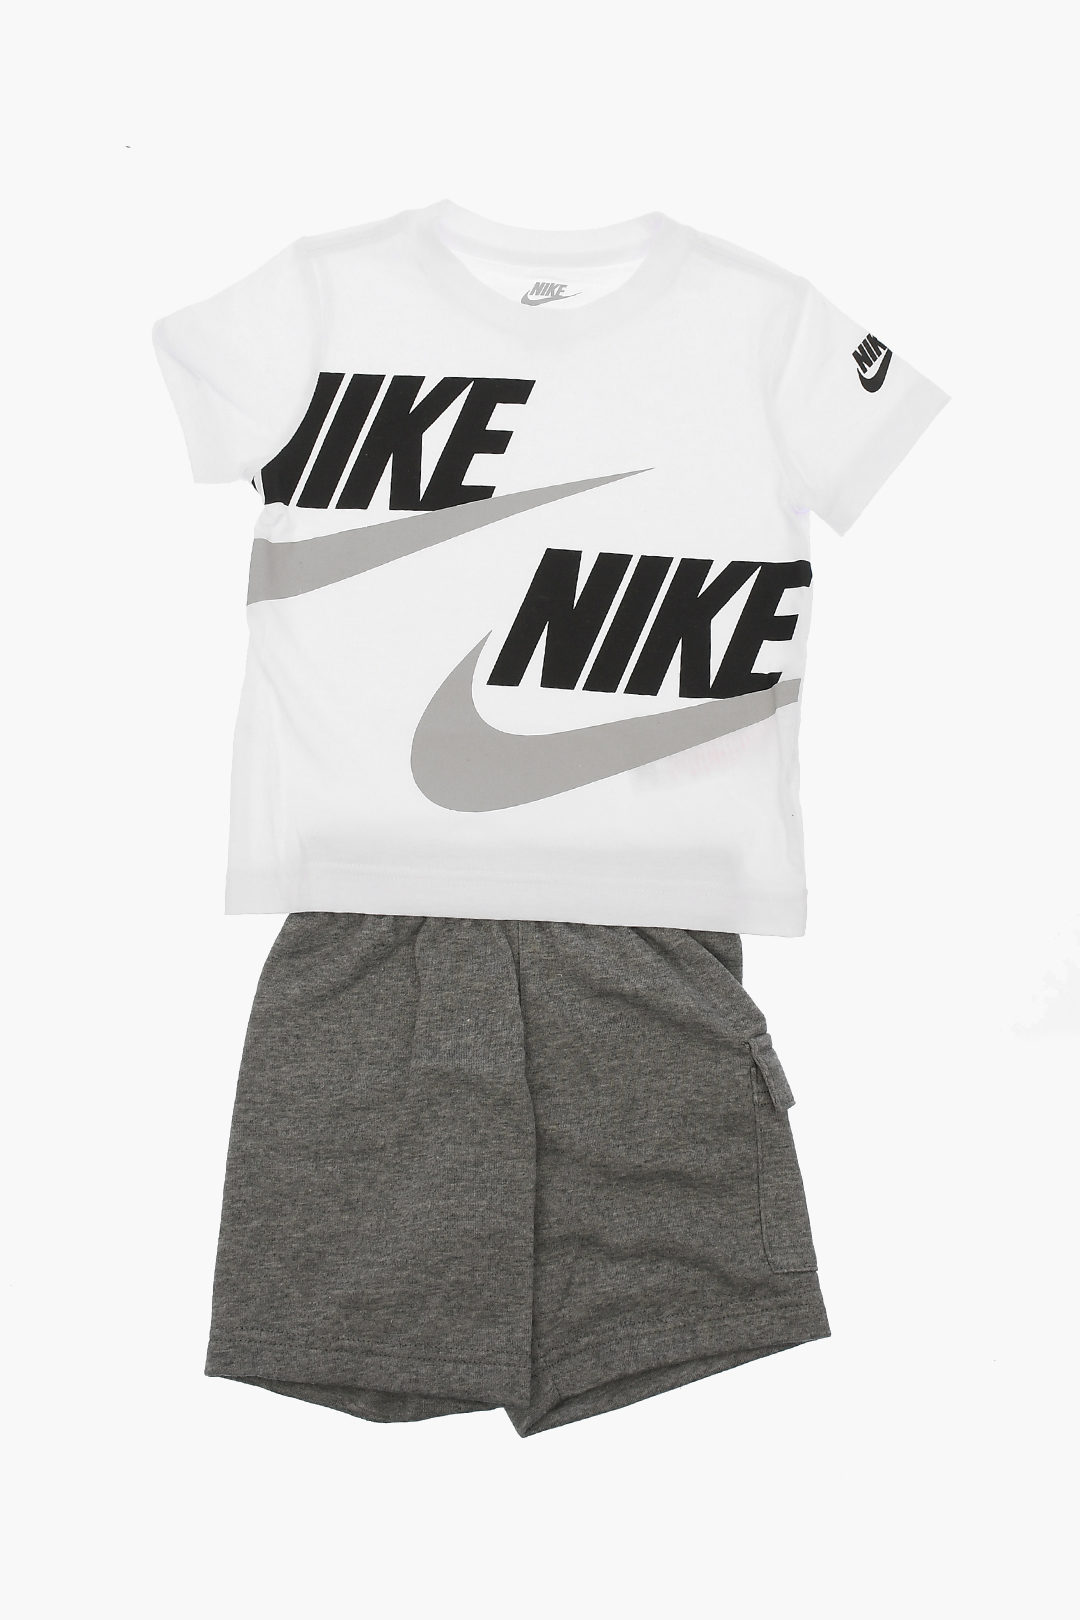 Nike KIDS and Shorts boys - Outlet